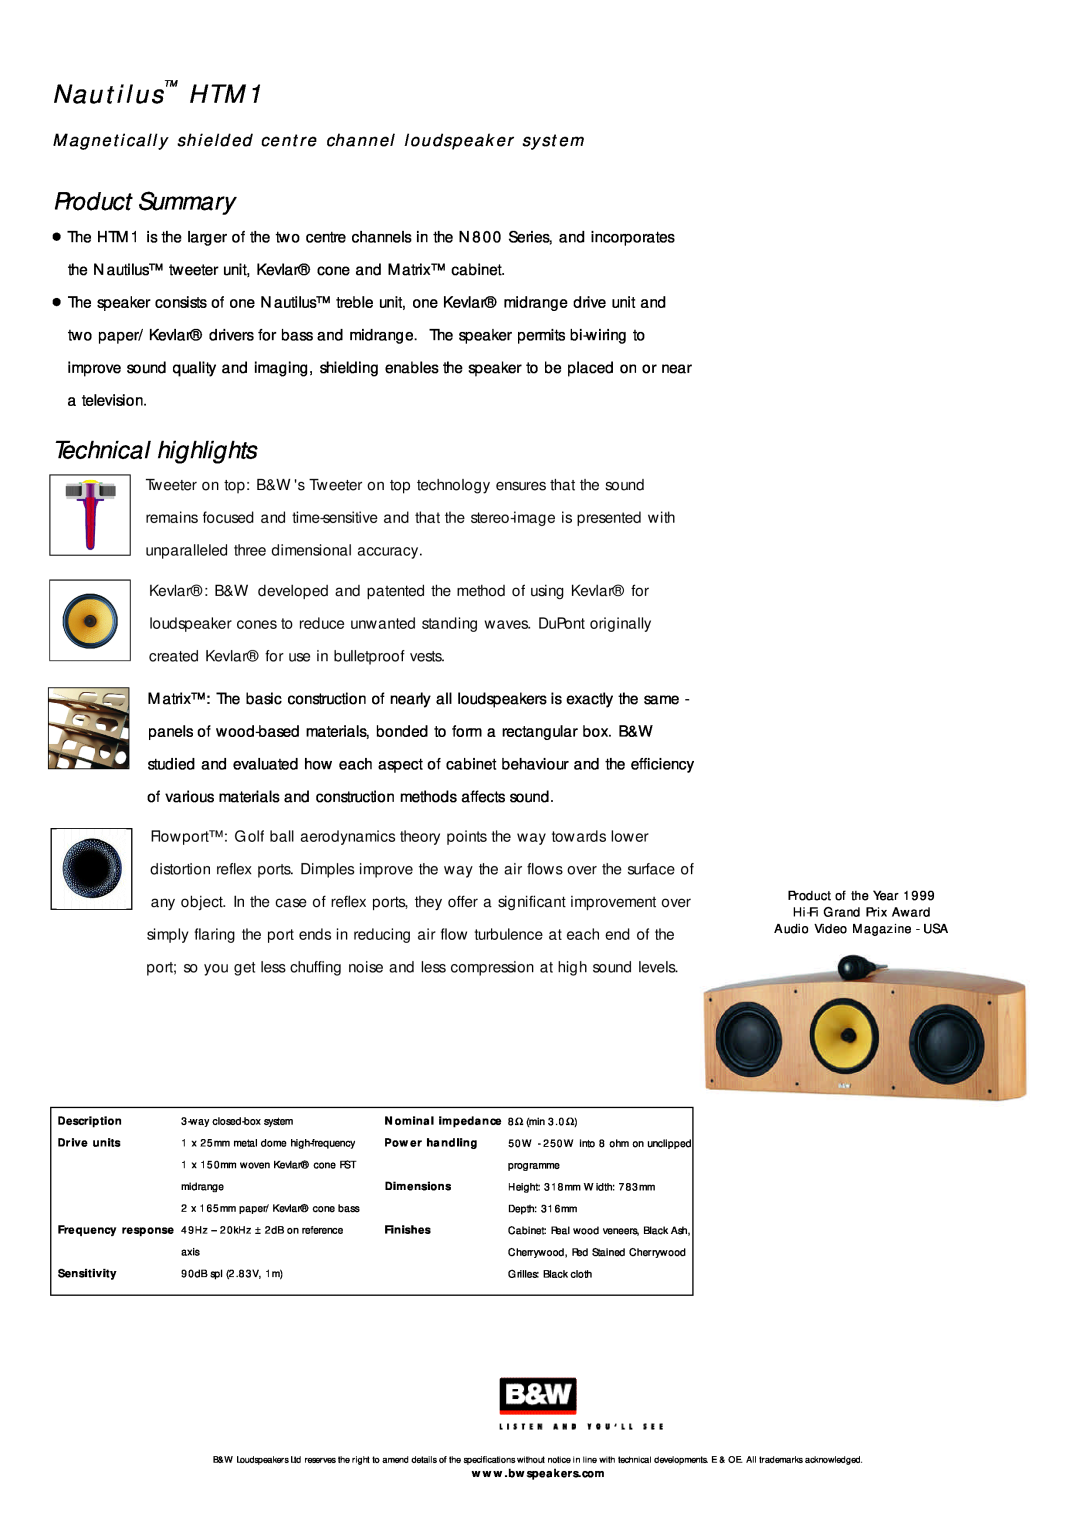 Bowers & Wilkins specifications Nau tilu s HTM1, Product Summary, Technical highlights 